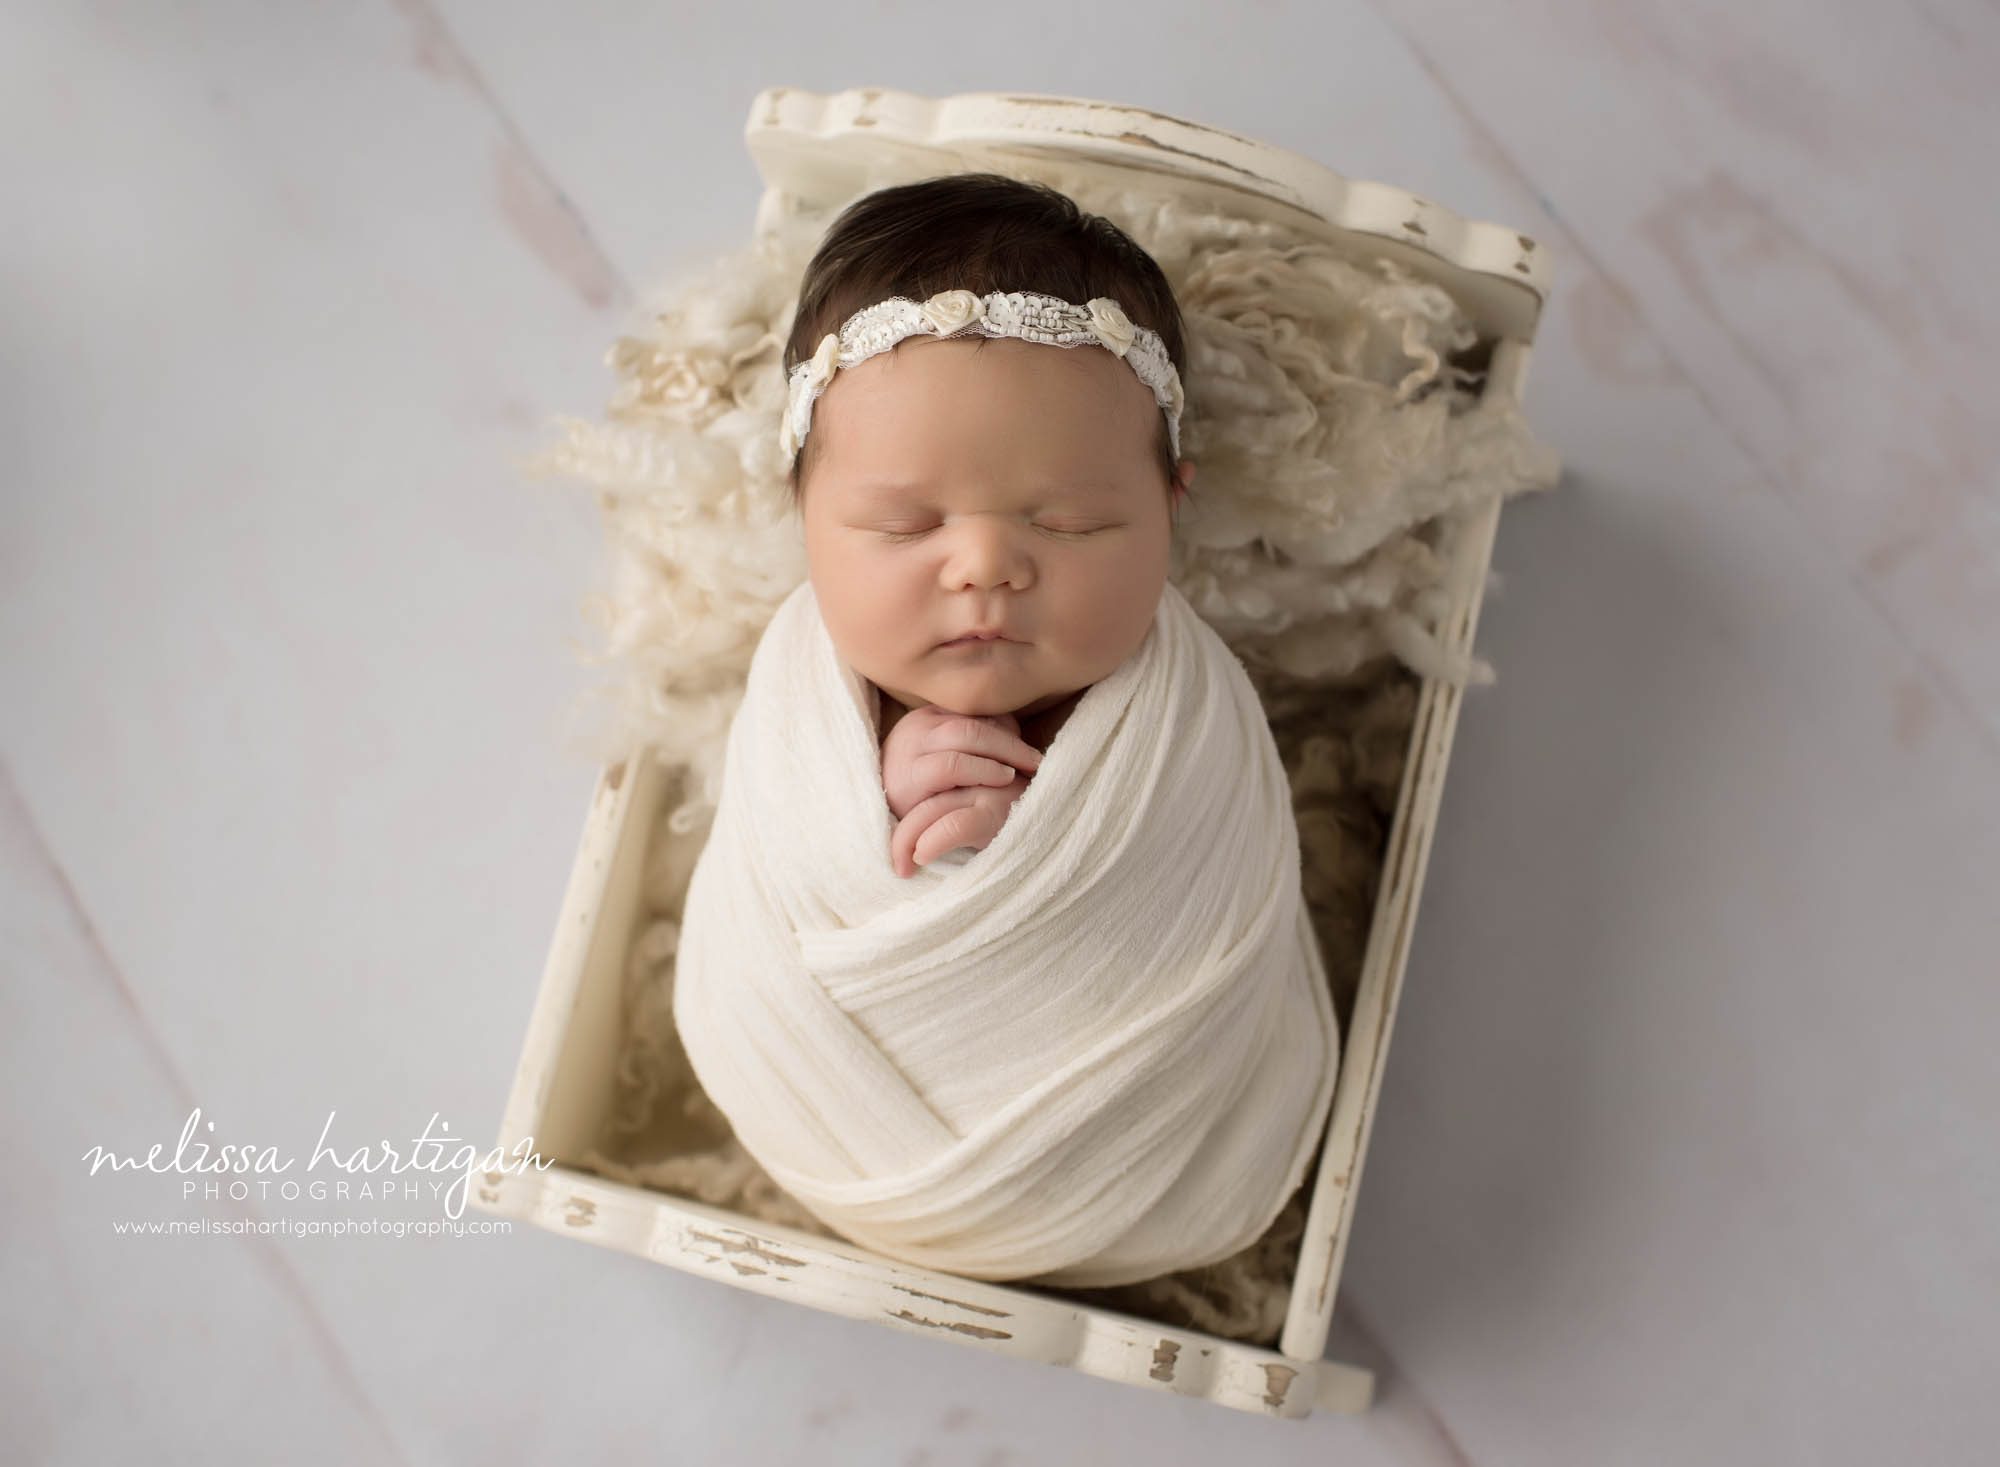 Newborn baby girl wrapped in cream color wrap posed in craddle Newborn Photography tolland county CT